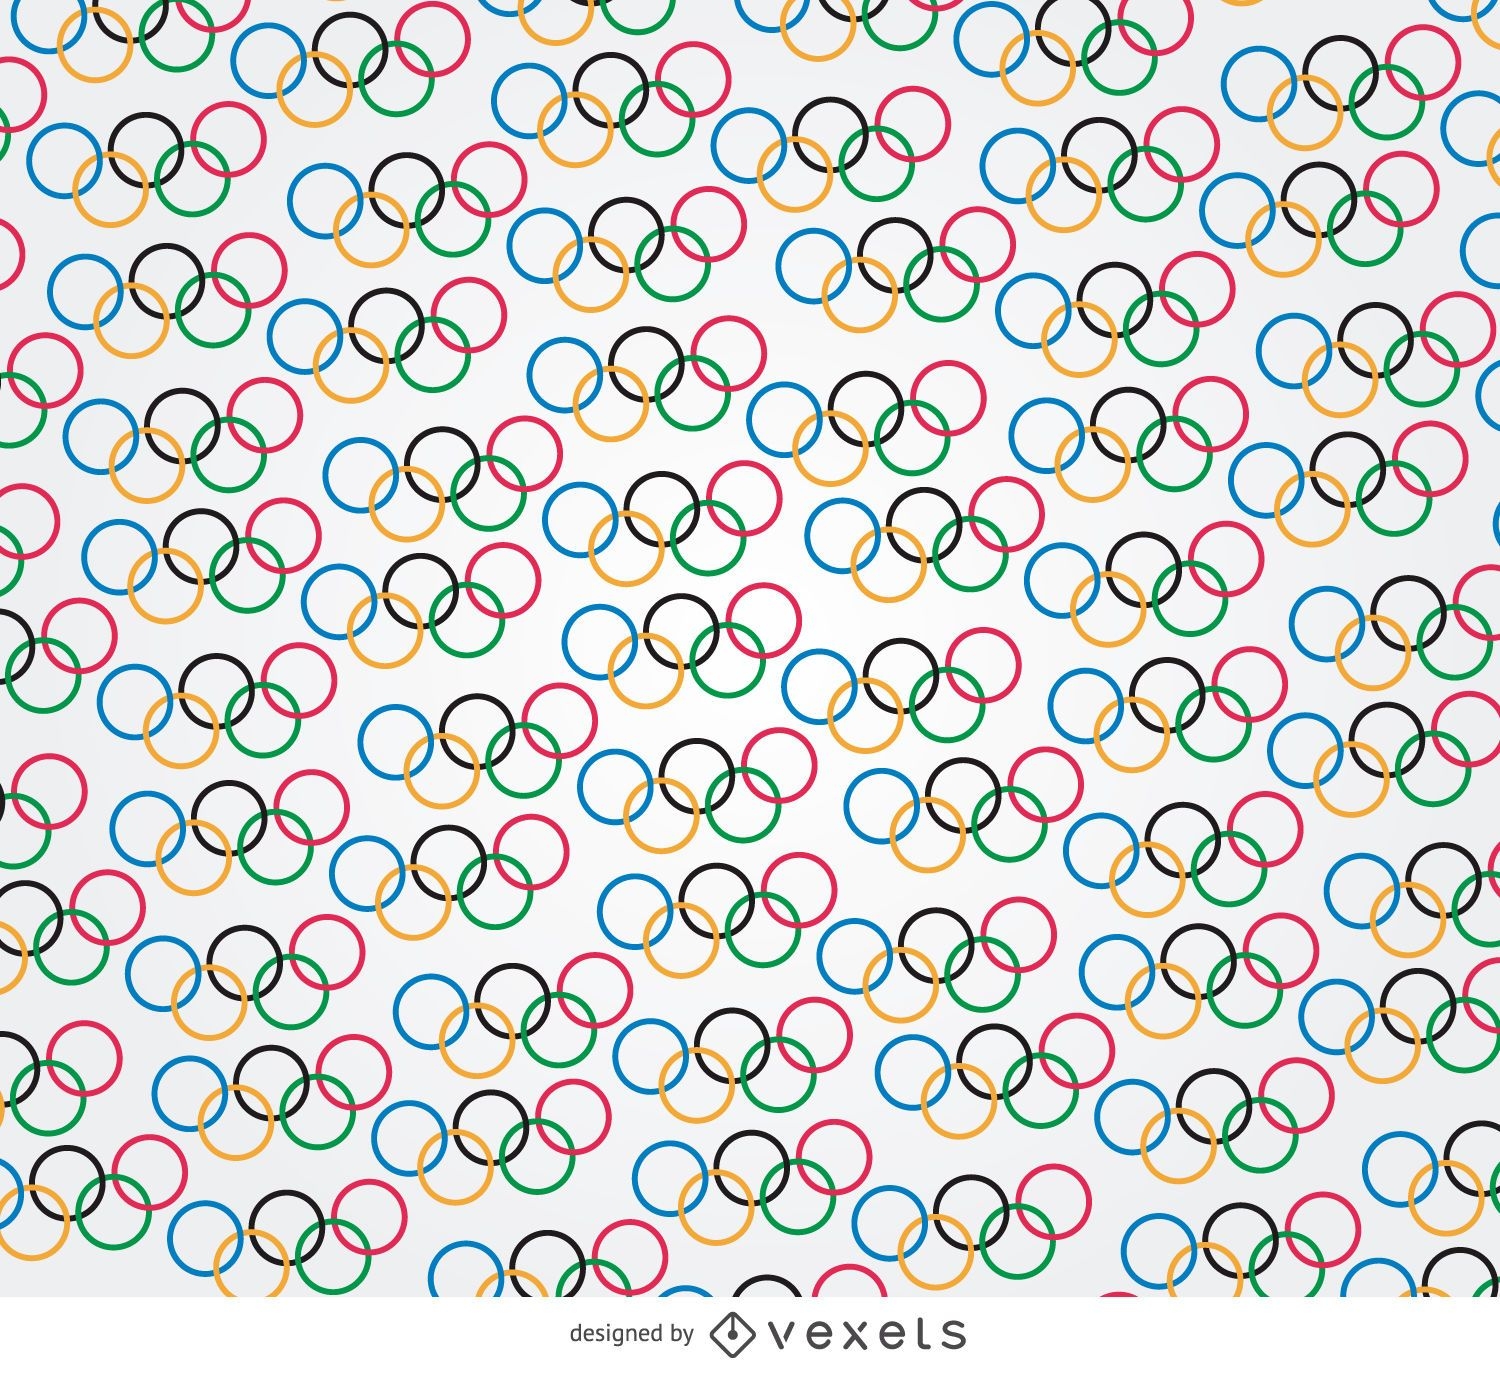 Olympic rings pattern